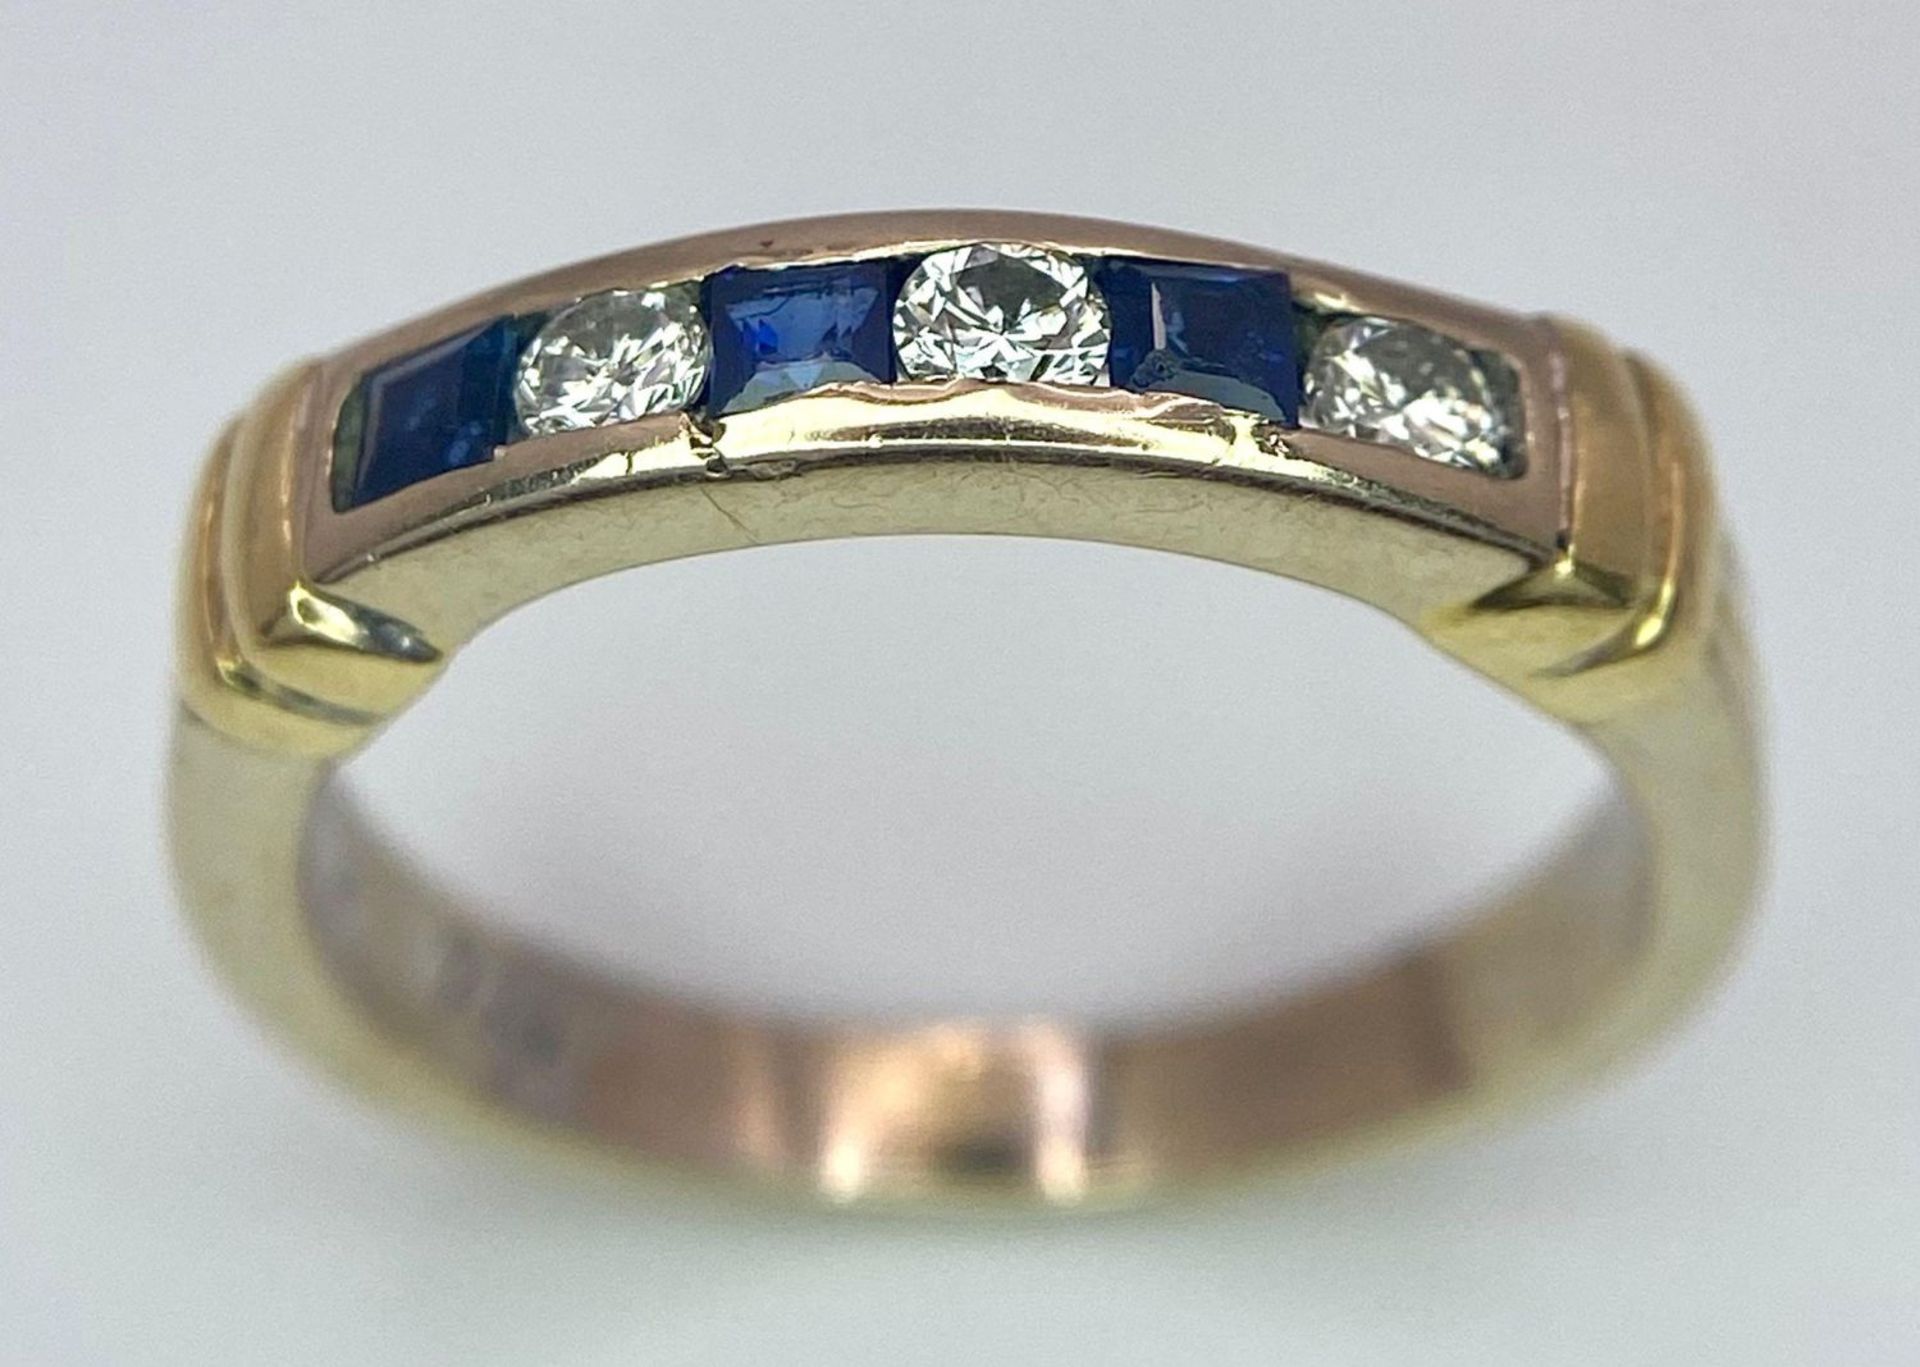 An 18 K yellow gold ring with alternating blue sapphires and diamonds. Size: K, weight: 3.2 g. - Image 10 of 13